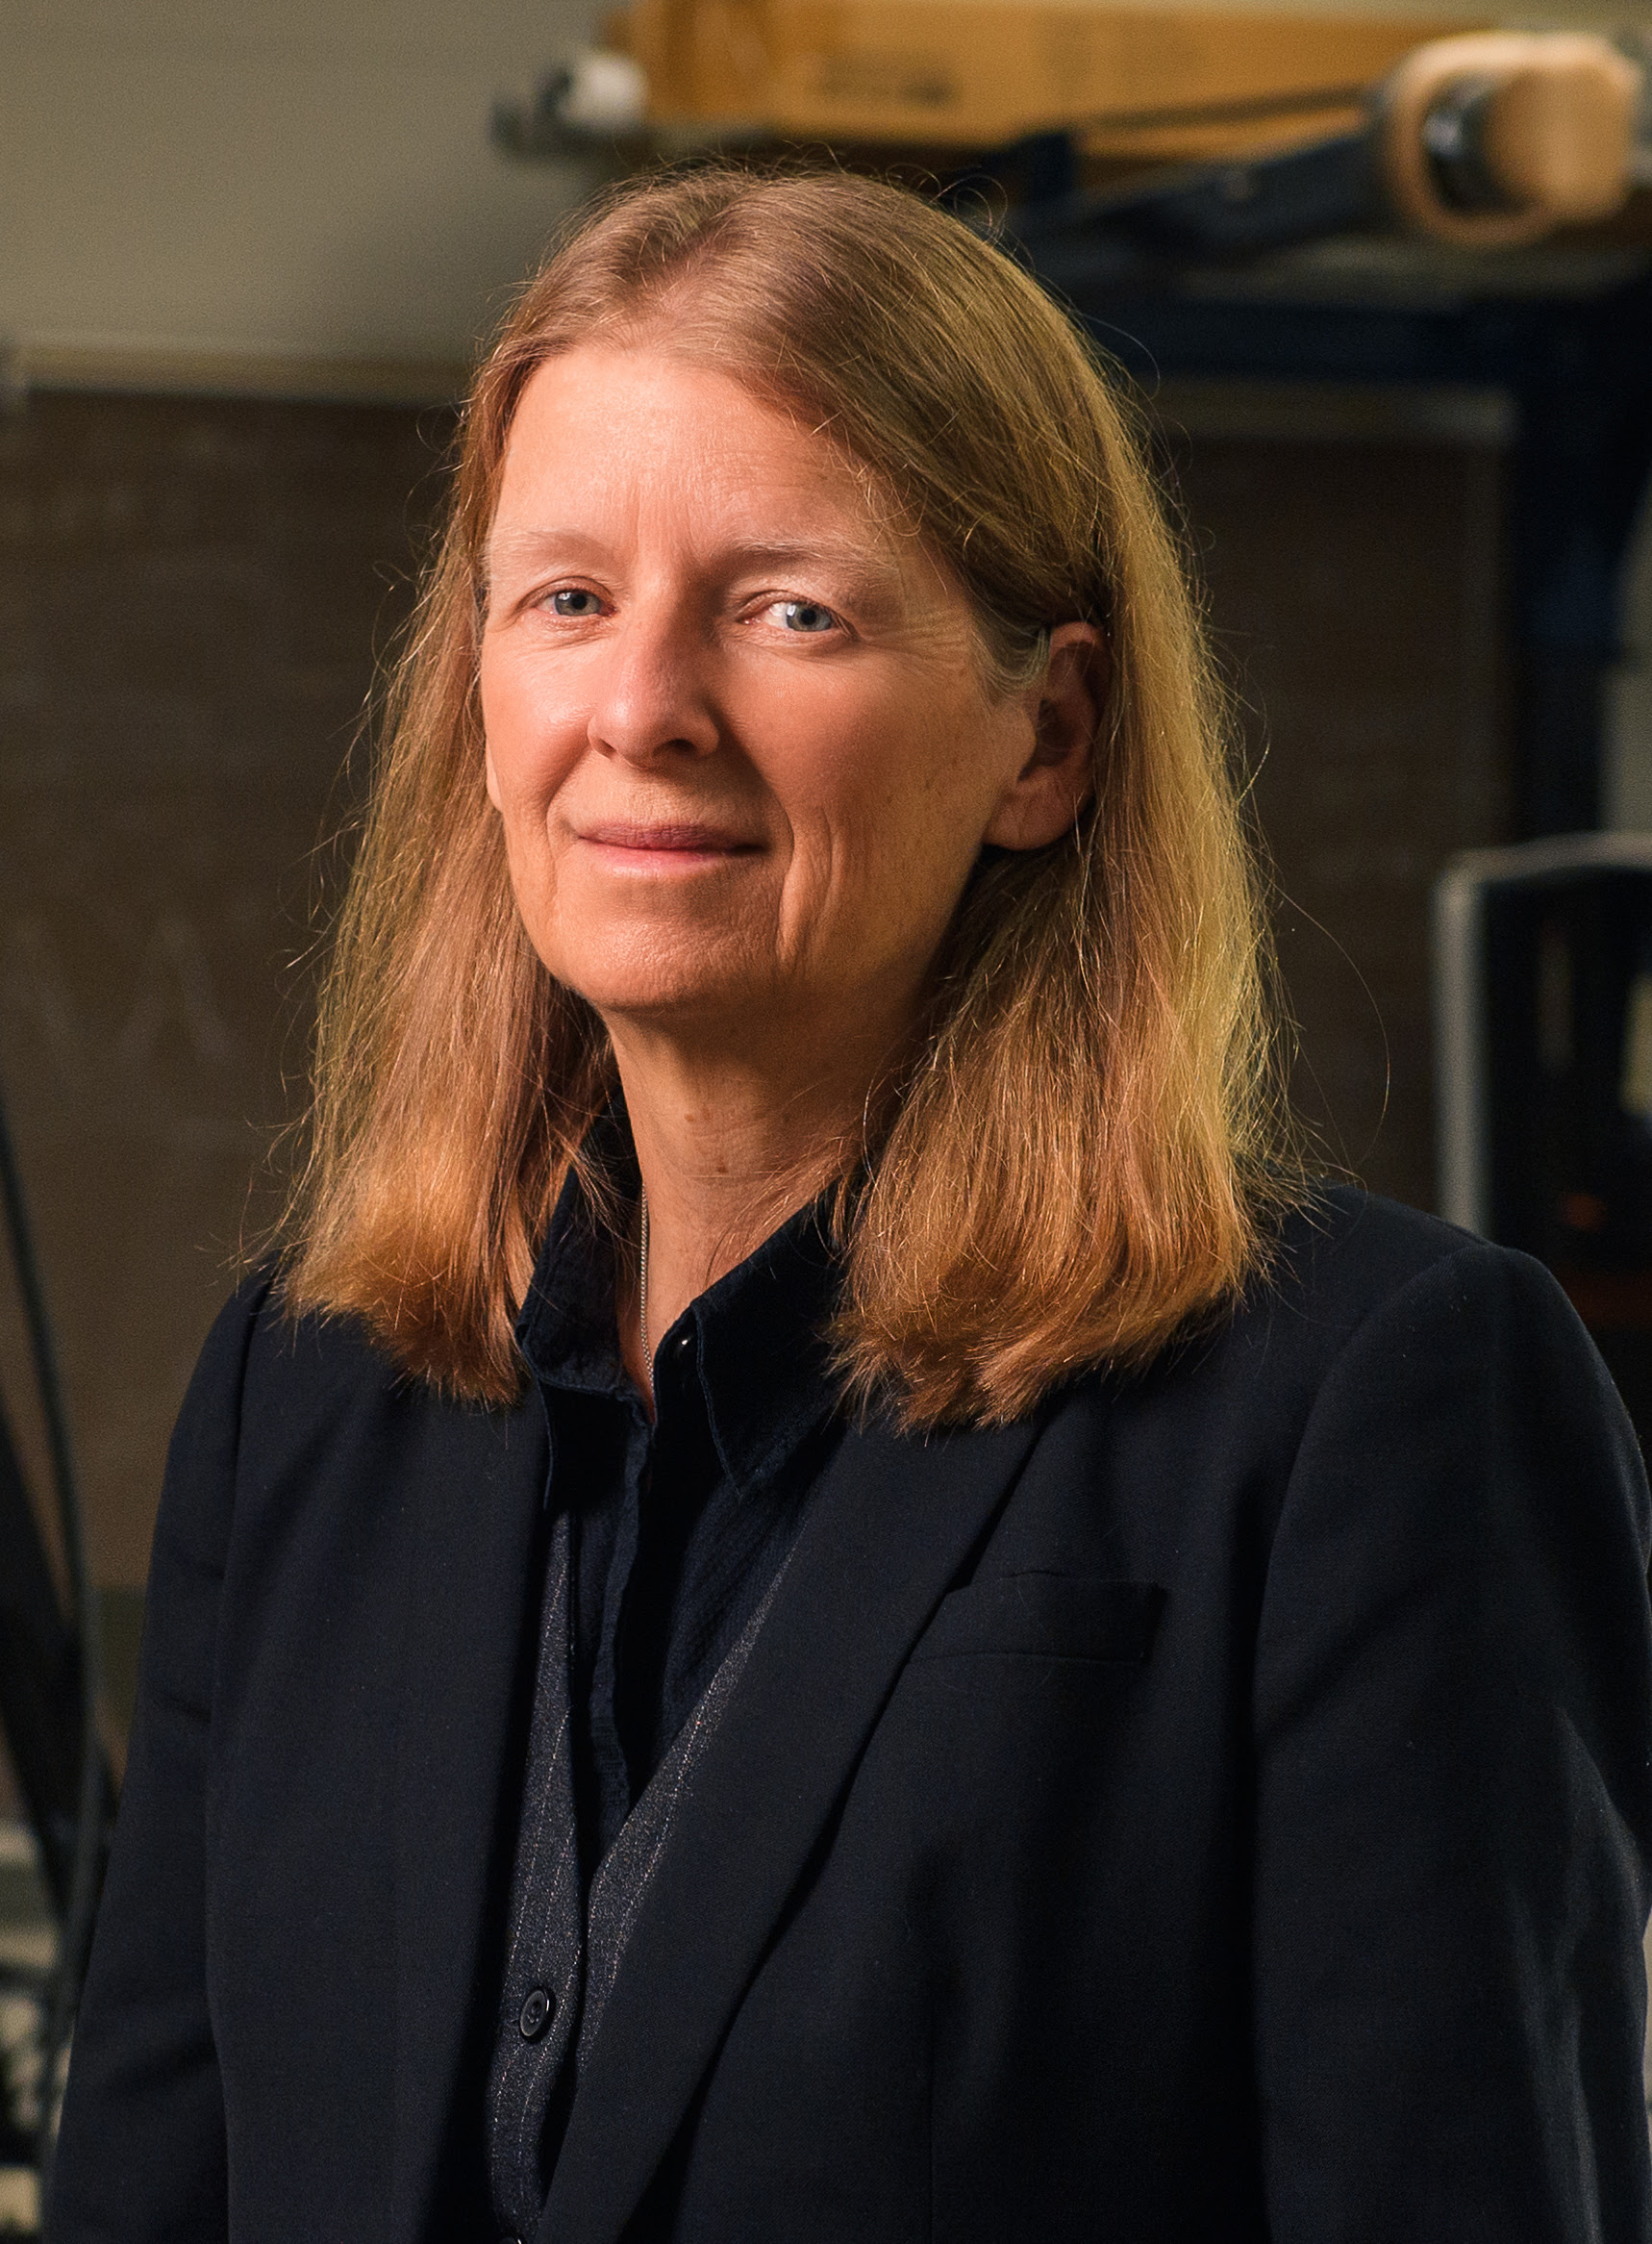 Purdue professor elected to the National Academy of Engineering – WBIW - WBIW.com